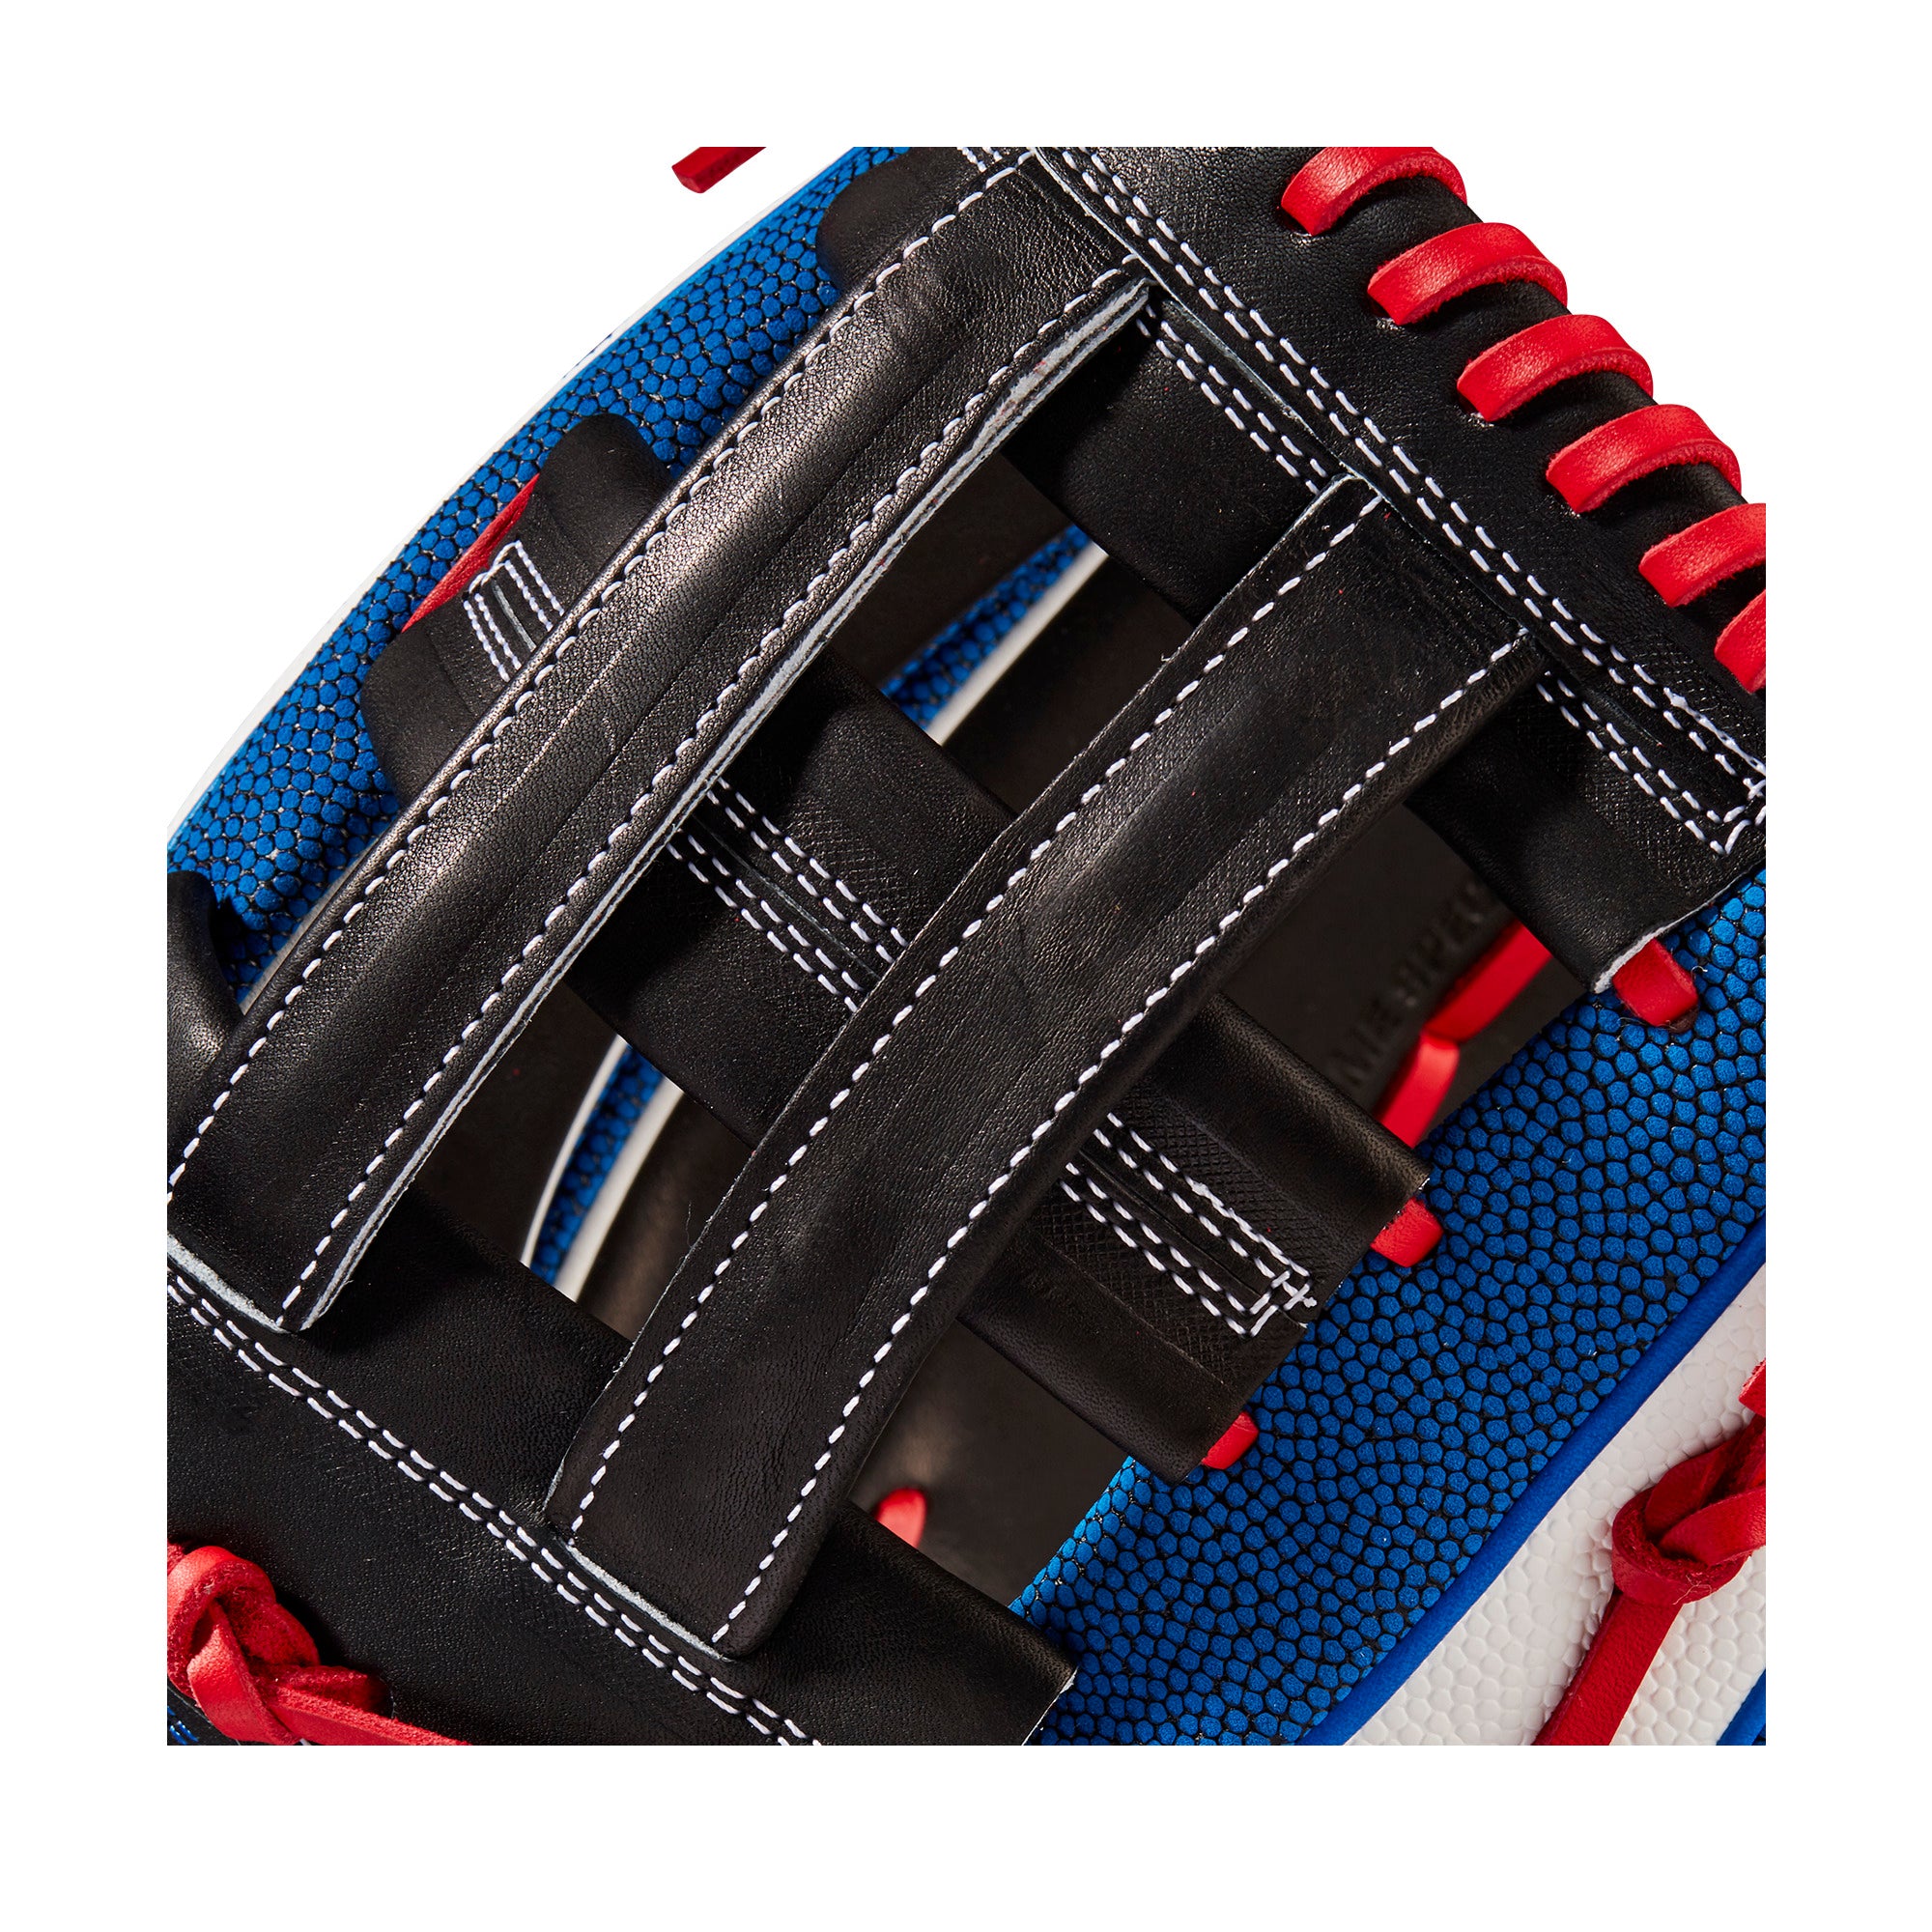 Wilson A2K Mookie Betts Game Model (OF) LHT 12.5 Black/White SS/Royal/Red